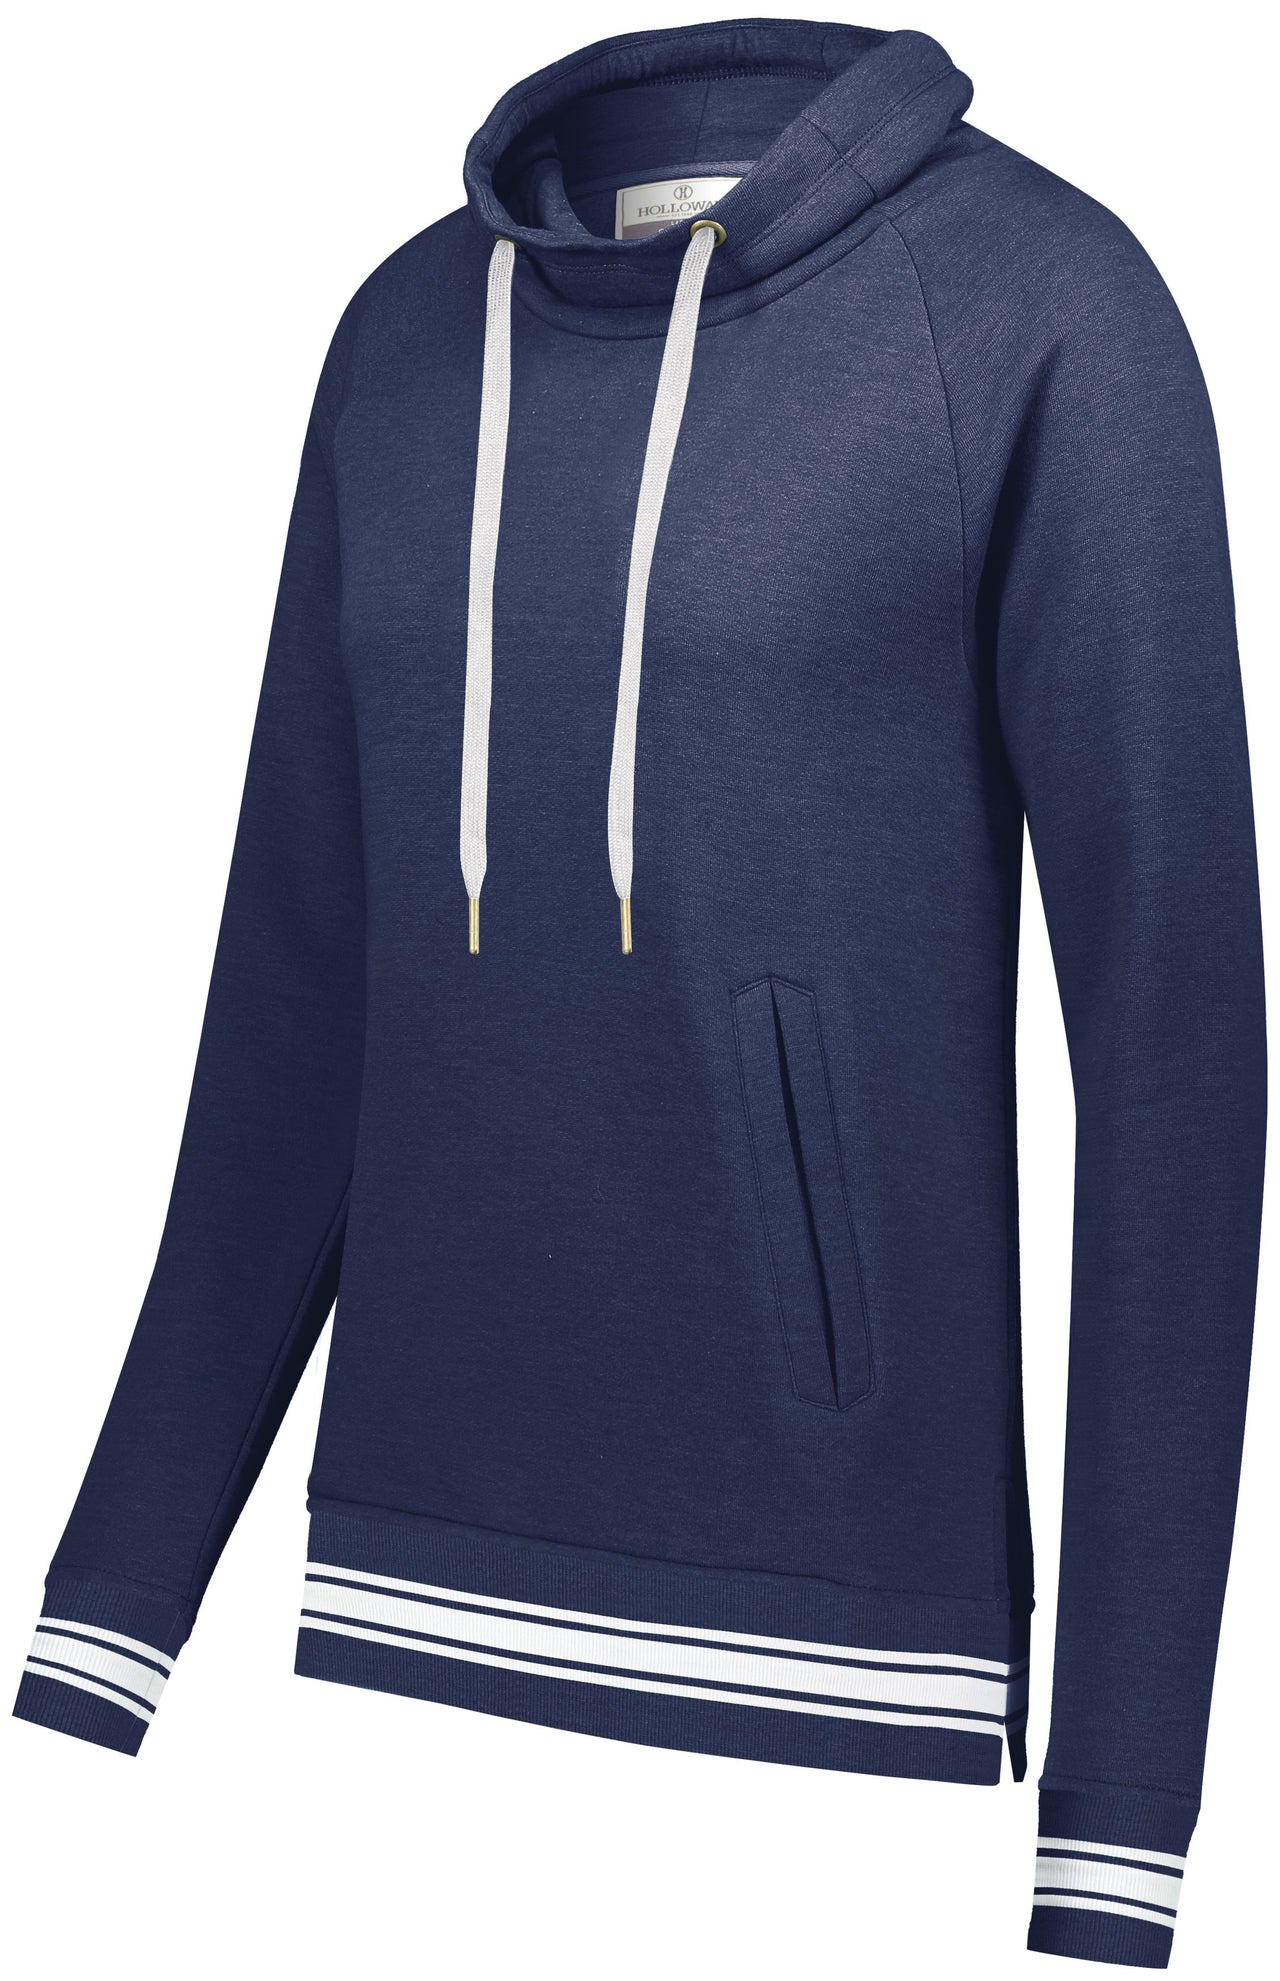 Ladies Ivy League Funnel Neck Pullover - 229763